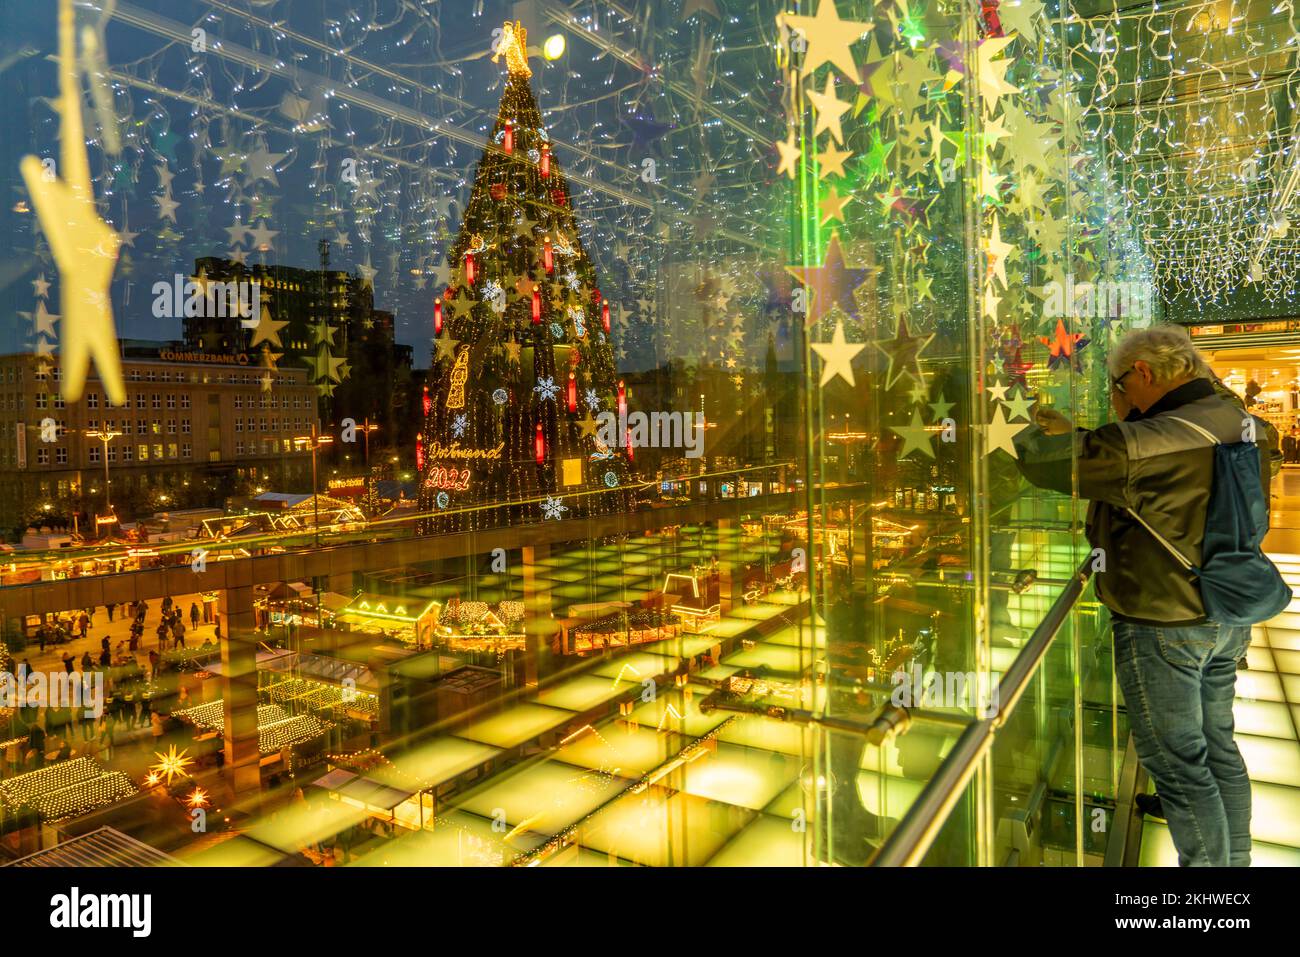 Christmas market in Dortmund, Hansaplatz, view from a pedestrian gallery between 2 department stores, onto the market with the biggest Christmas tree Stock Photo